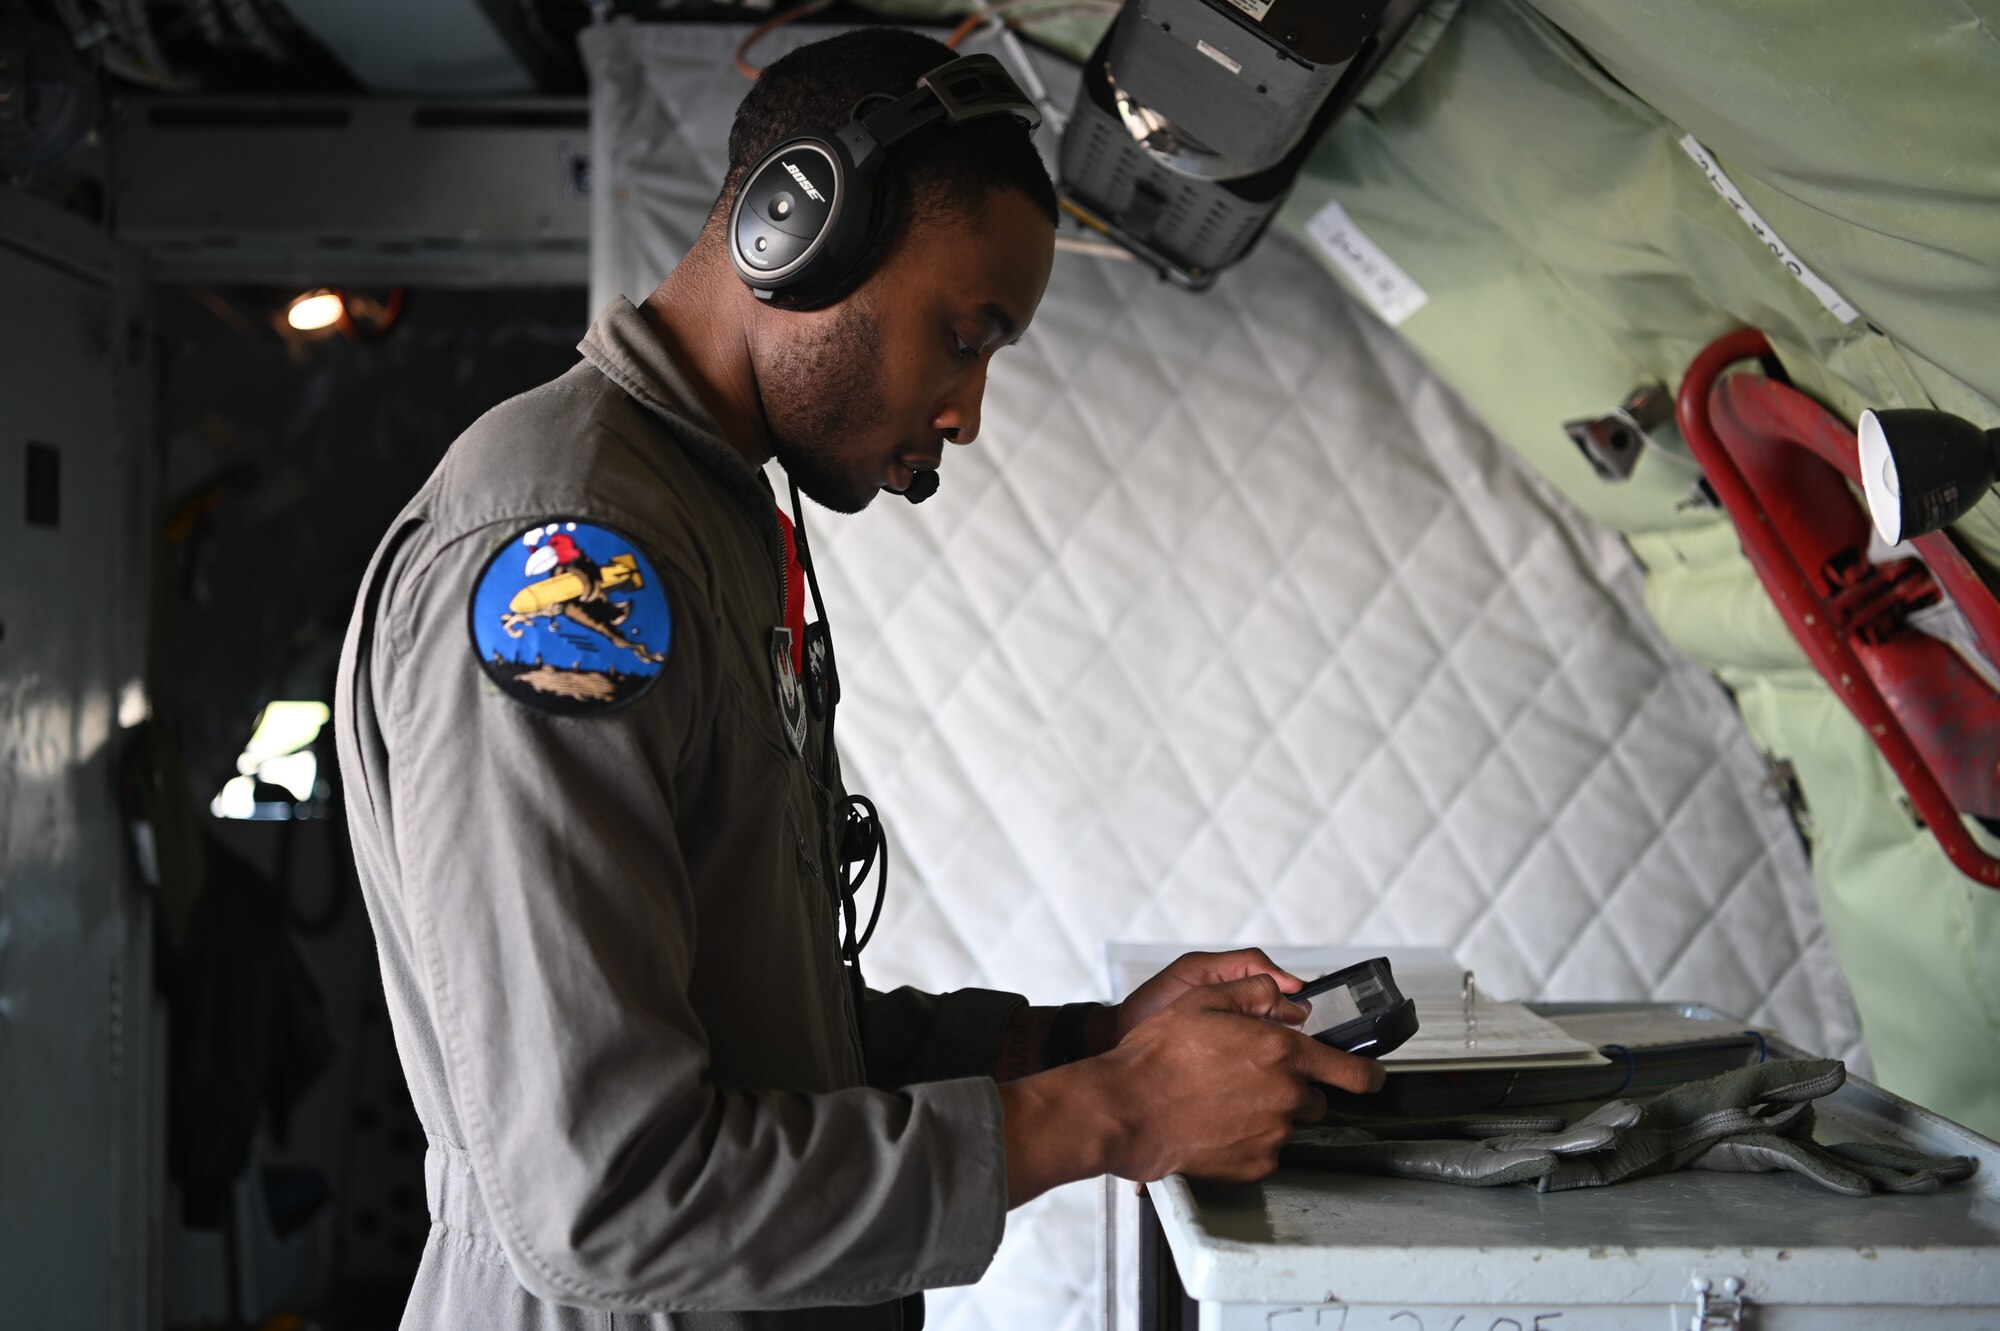 U. S. Air Force Tech. Sgt. Alex Govan, 351st Air Refueling Squadron boom operator, goes over a checklist prior to takeoff at Royal Air Force Mildenhall, England, June 4, 2021. The checklist is apart of a pre-flight inspection to ensure the aircraft was fit to fly over Omaha Beach, France, for a ceremony in honor of Charles Norman Shay, who served in the first wave attack on the beach. (U.S. Air Force photo by Staff Sgt. Matthew J. Wisher)